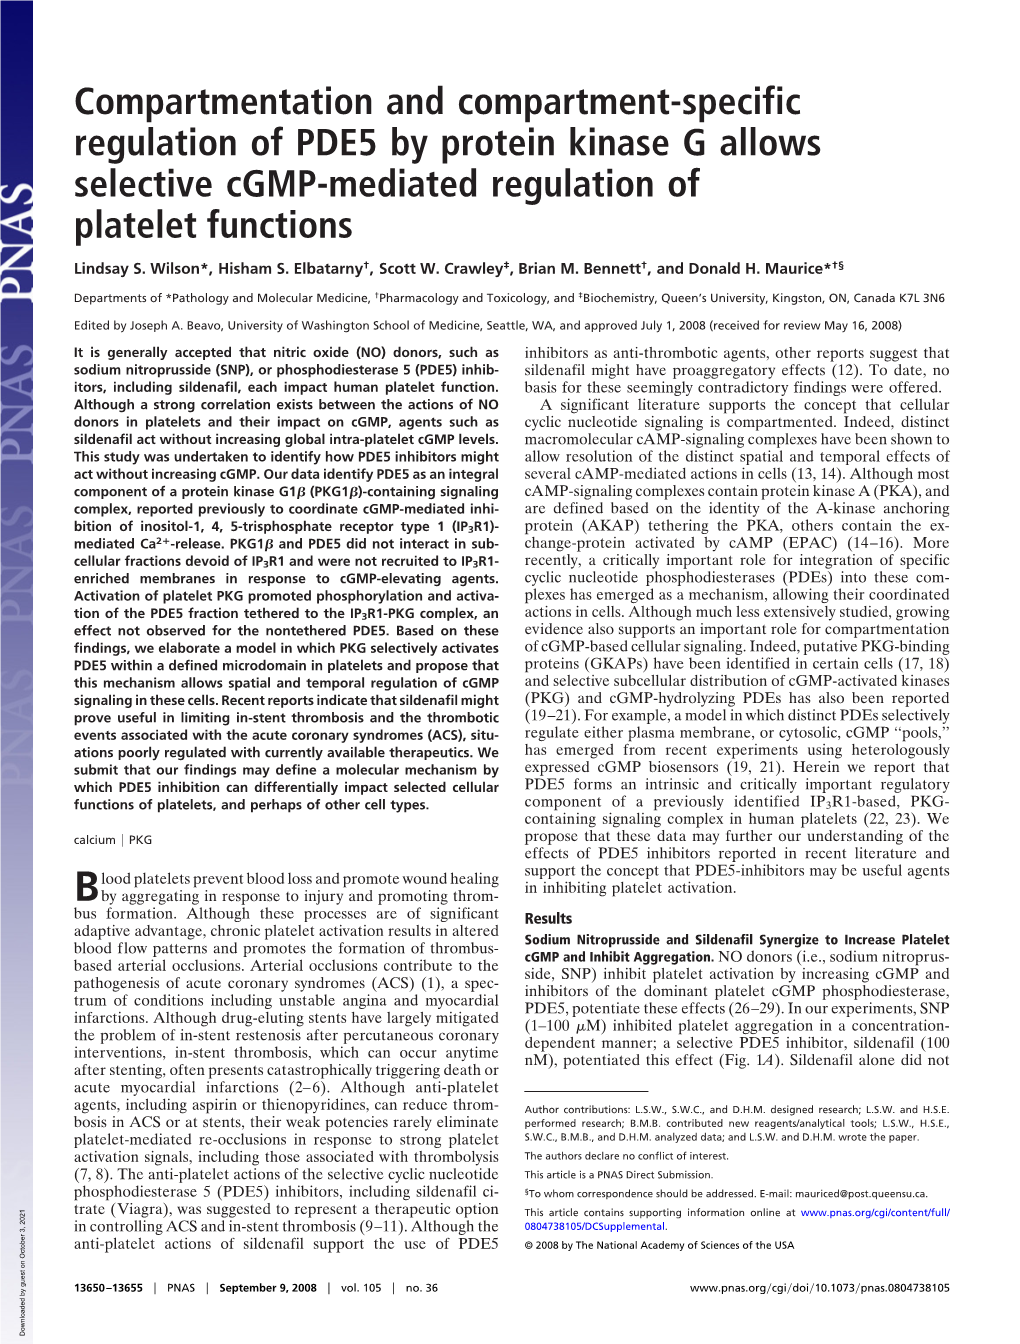 Compartmentation and Compartment-Specific Regulation of PDE5 by Protein Kinase G Allows Selective Cgmp-Mediated Regulation of Platelet Functions